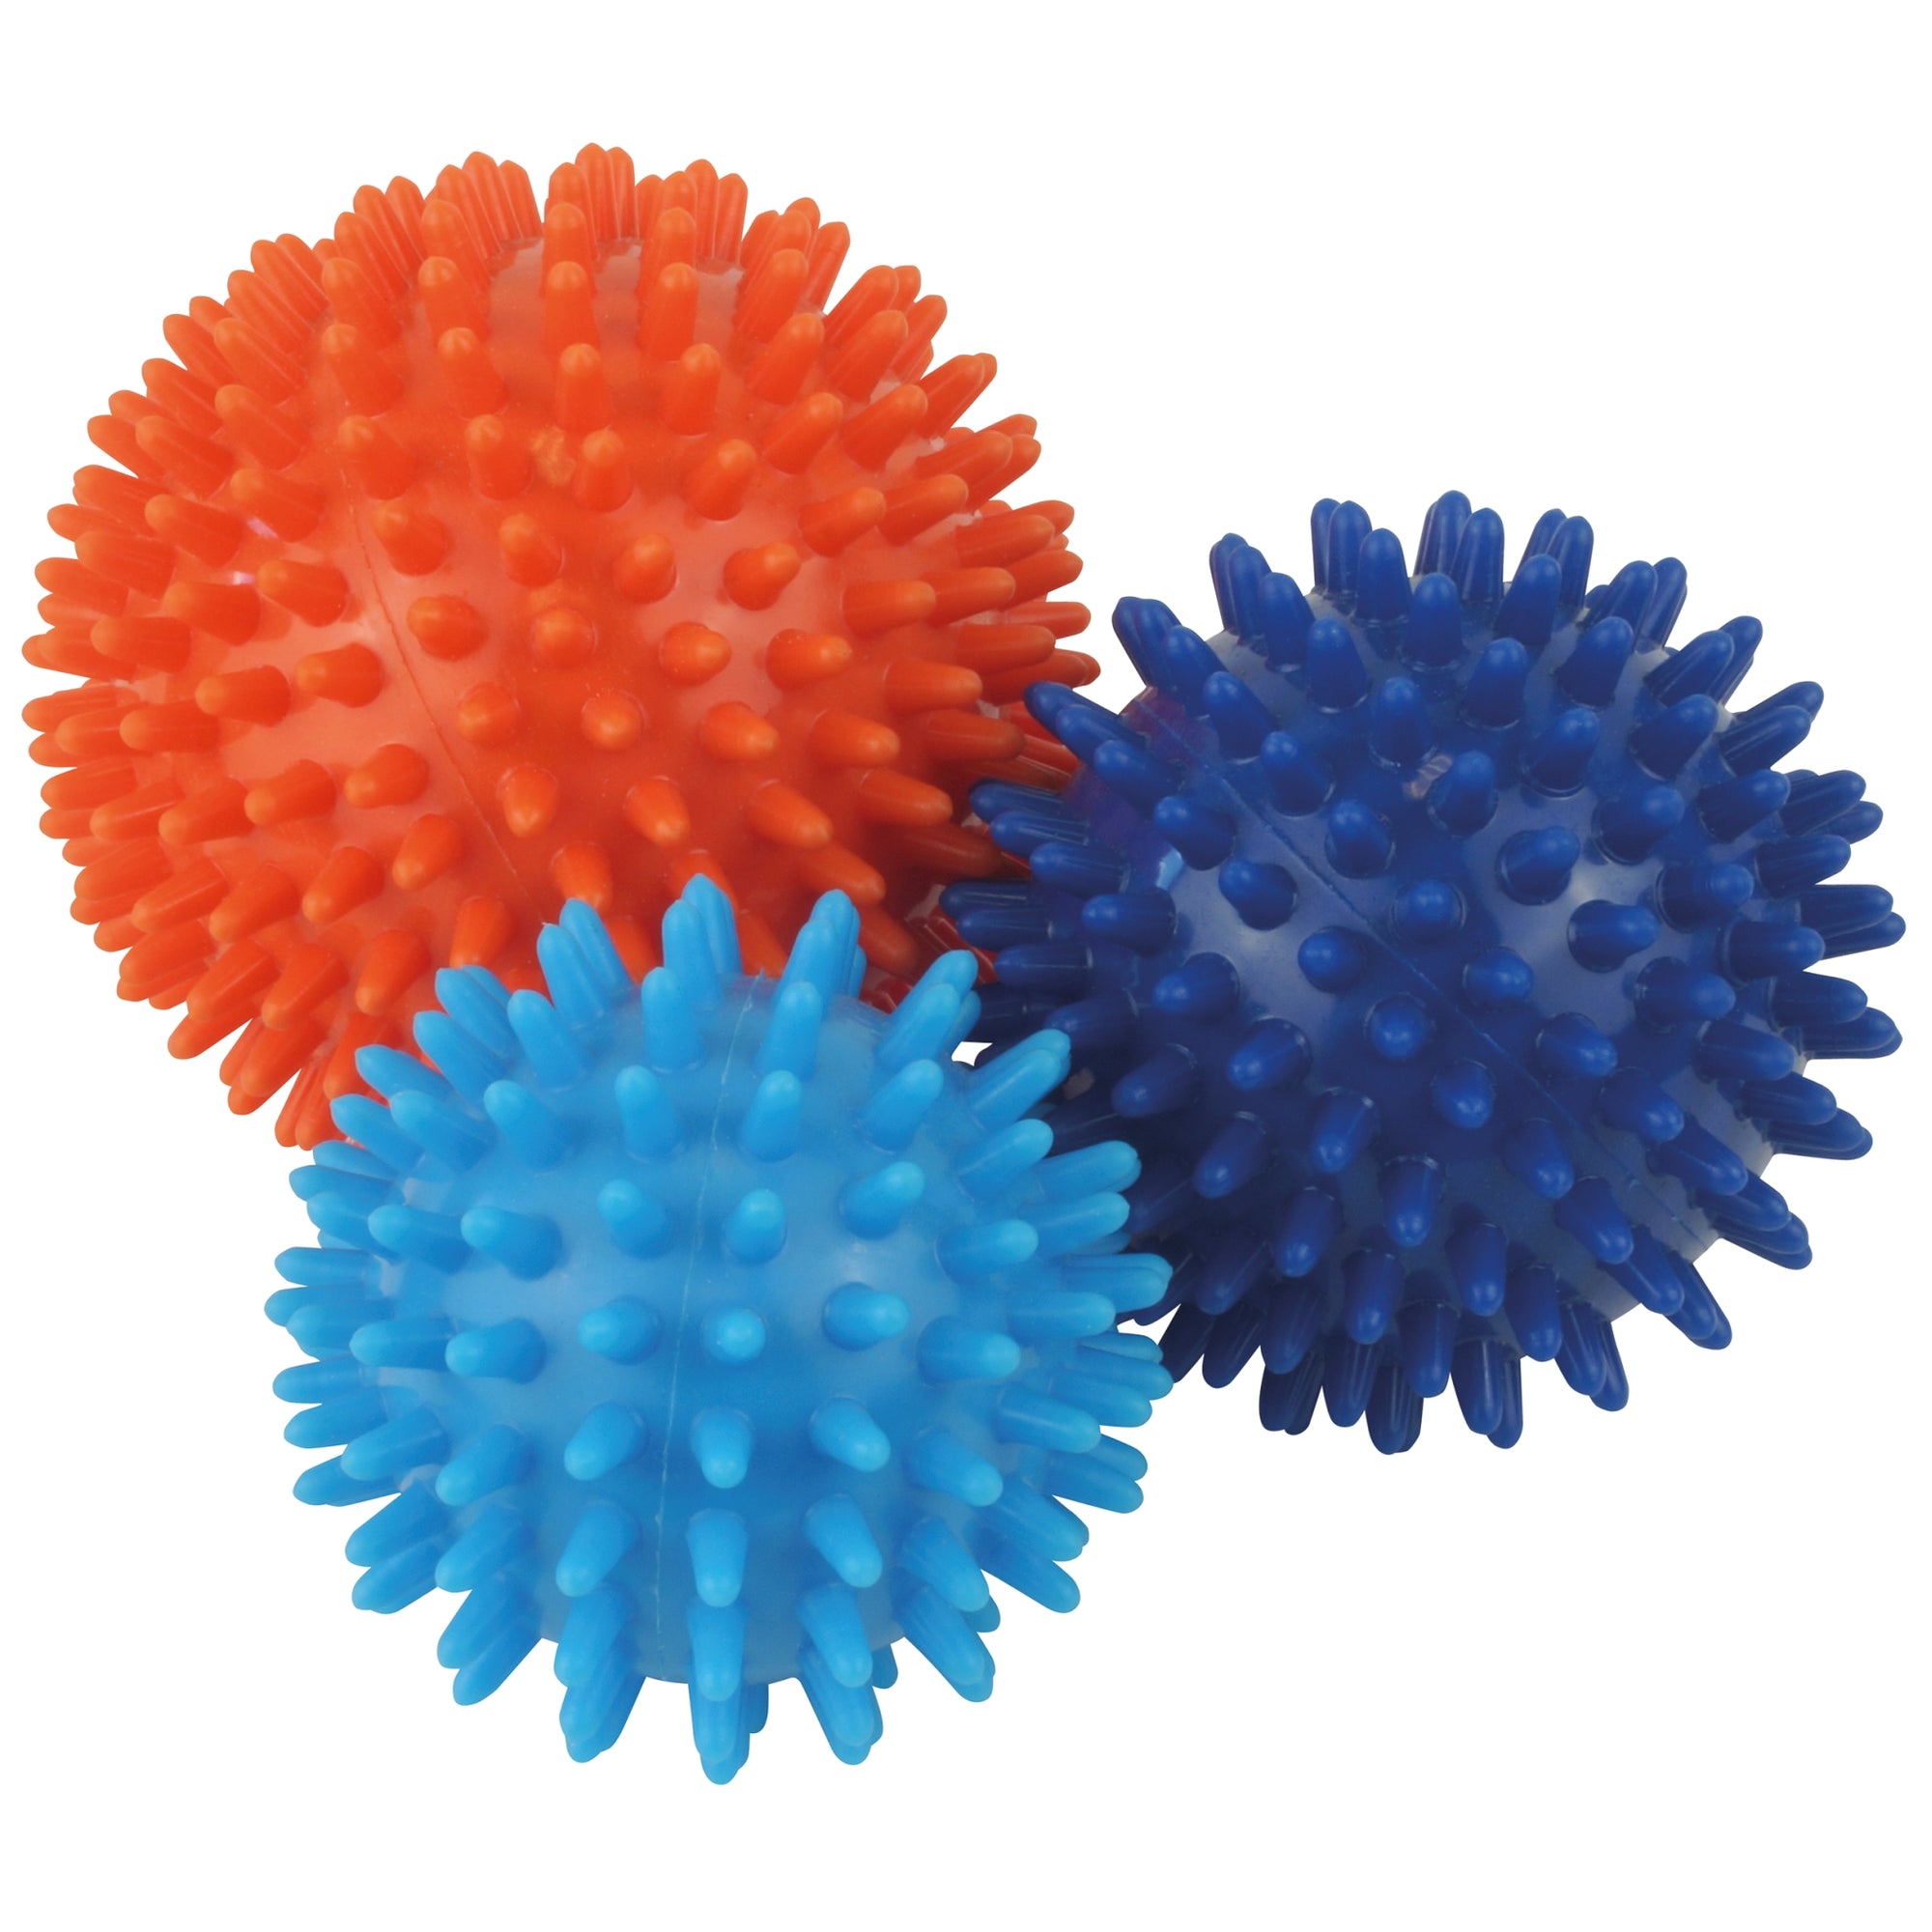 UFE Spiky Massage Balls Set. Large red ball, dark blue mid size and small light blue spiky ball